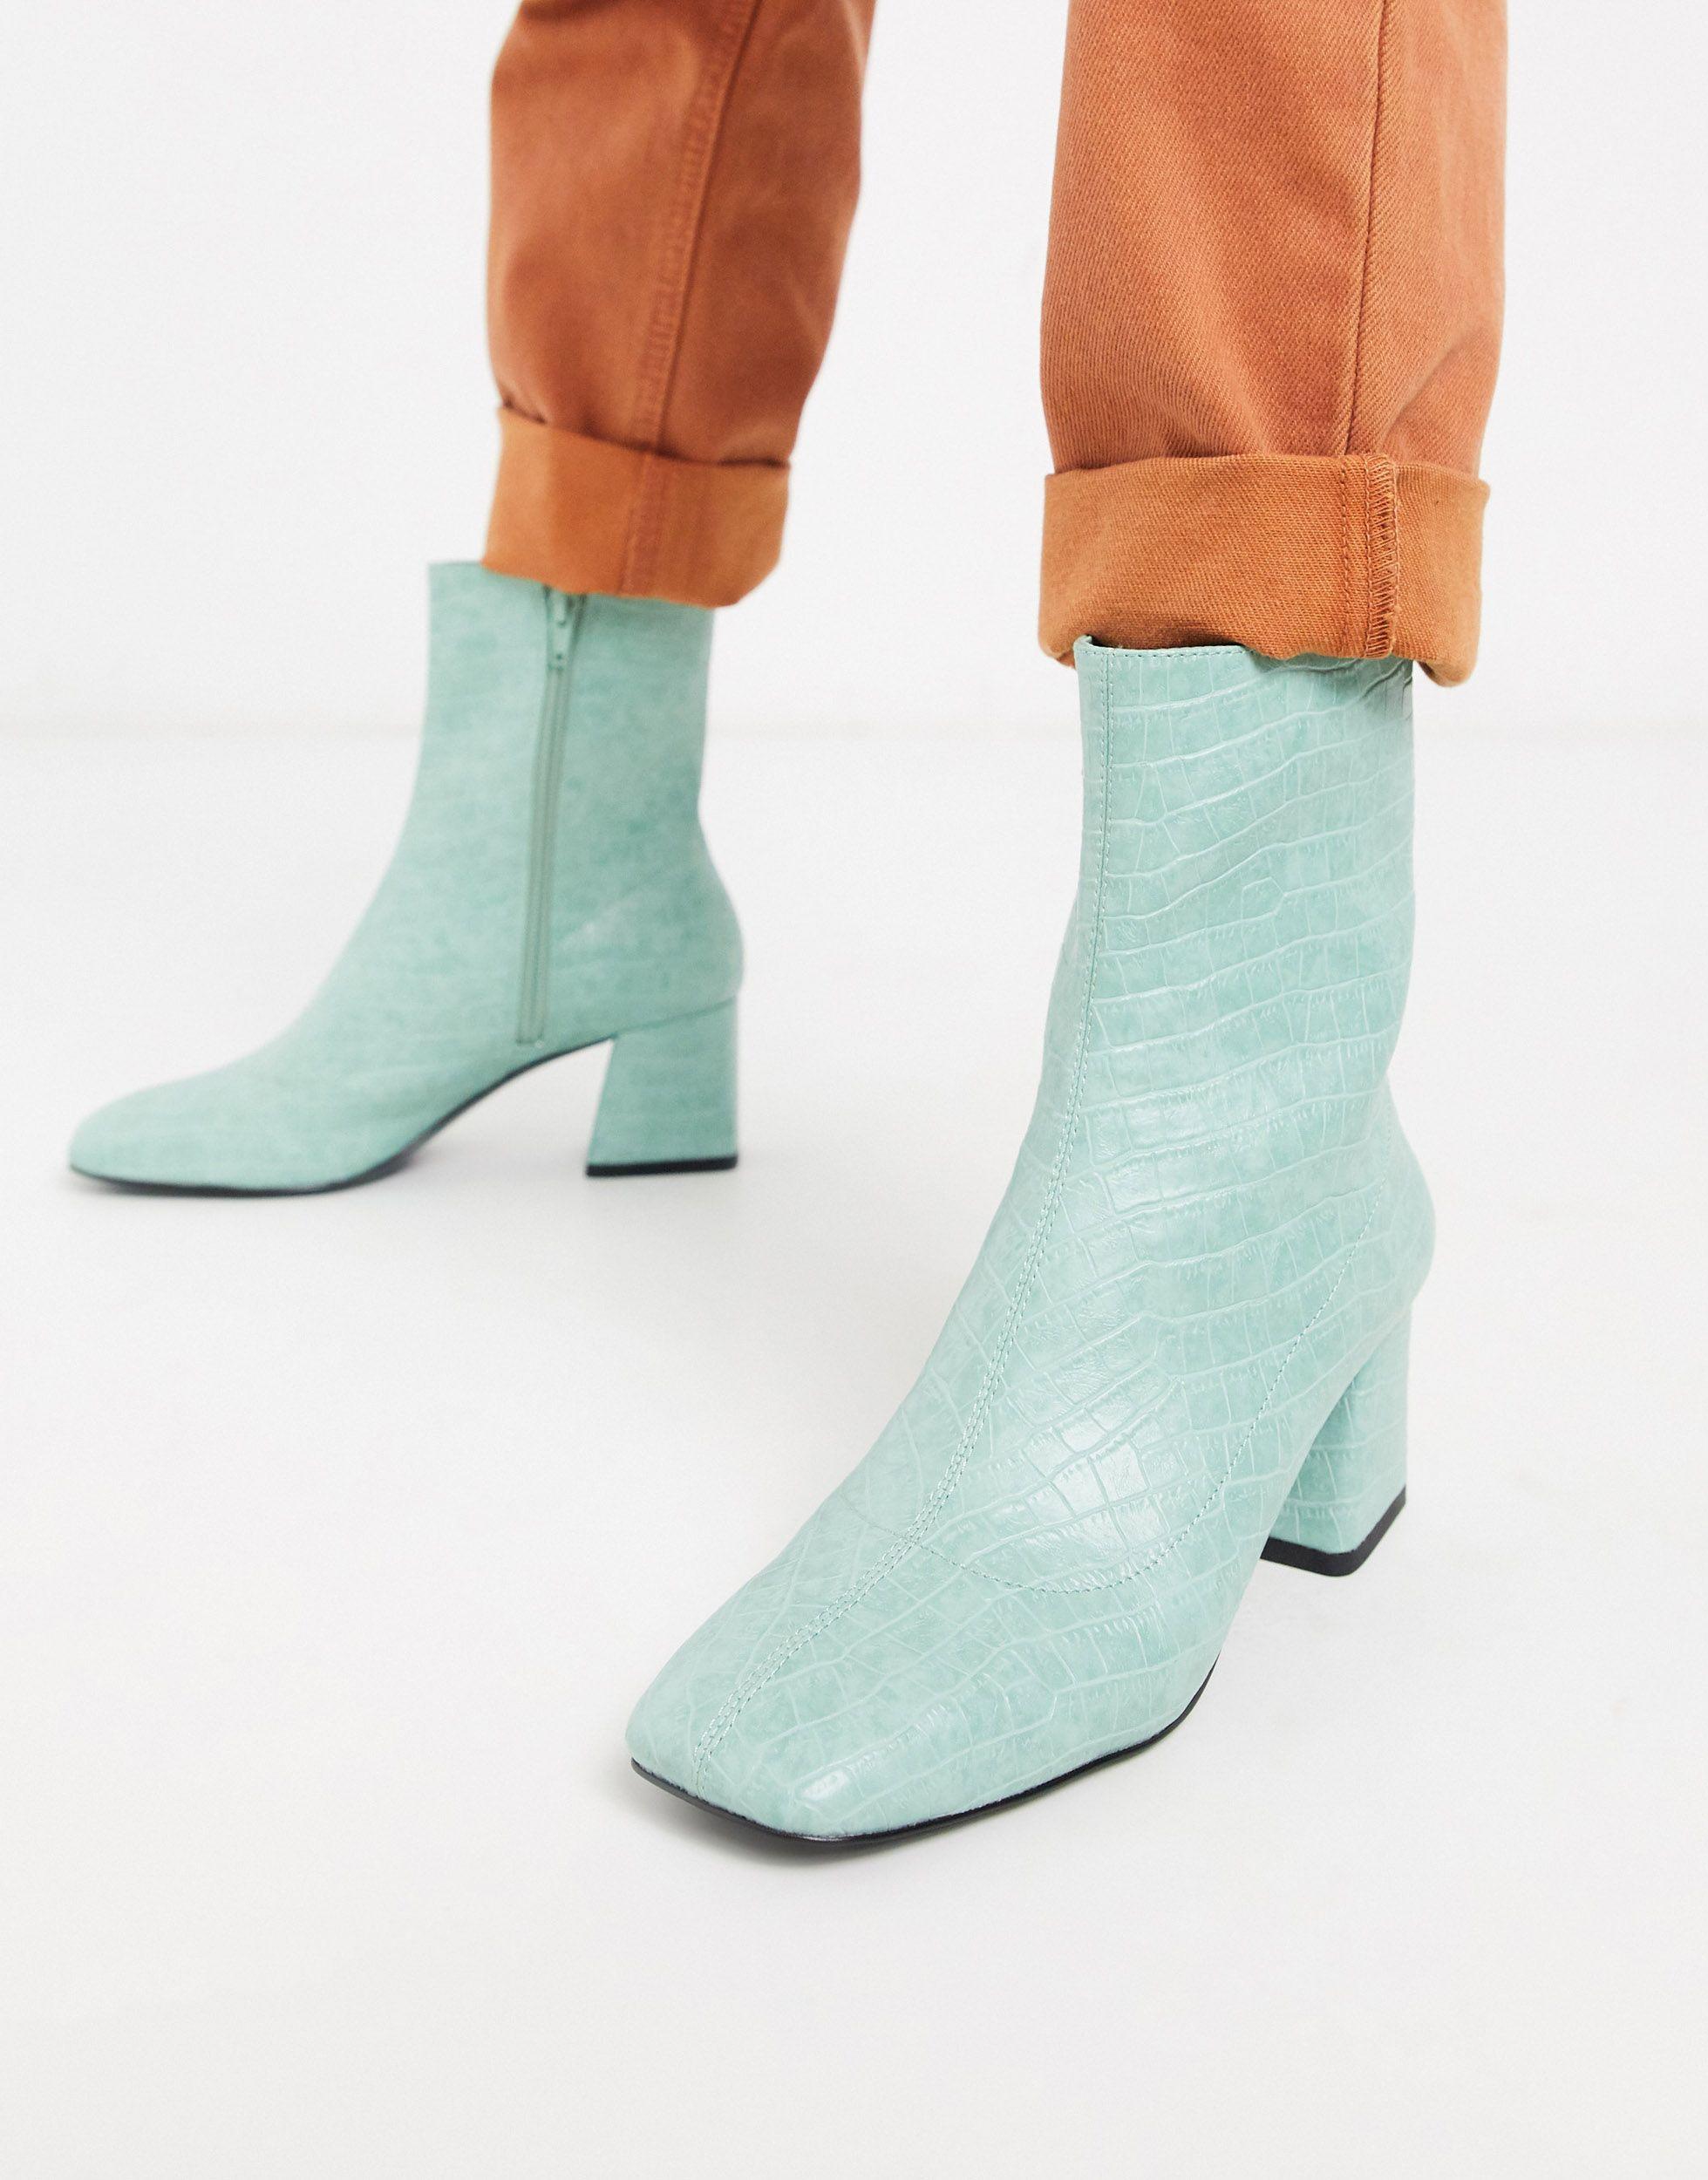 Monki Croc Print Ankle Boots With Block Heel in Green | Lyst